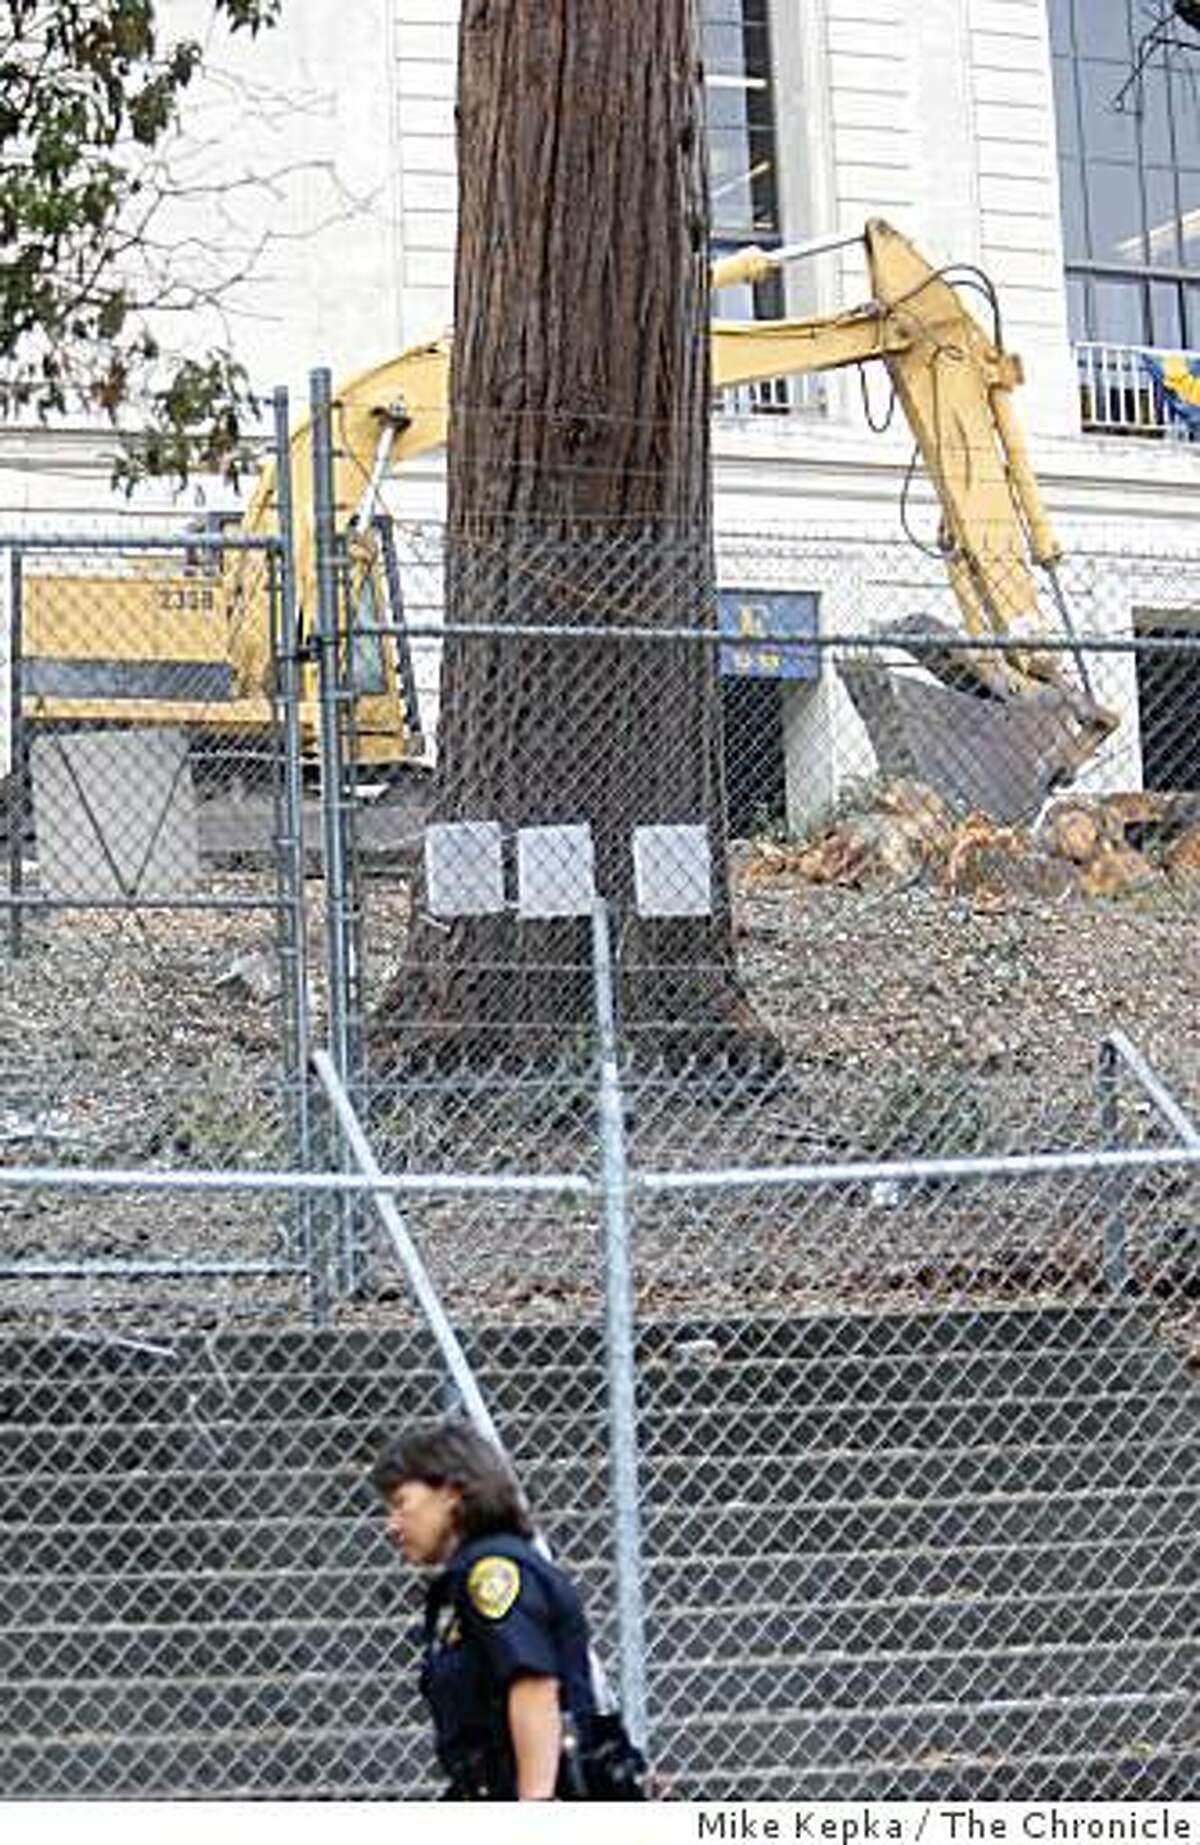 A U.C. Berkeley police officer walks past the last standing tree near what was once a grove of oaks and redwoods on the site of U.C. Berkeley's new sports complex, wave from their perch on Monday Sept. 8, 2008 in Berkeley, Calif. After two years of protest 4 tree sitters still remain in the tree.